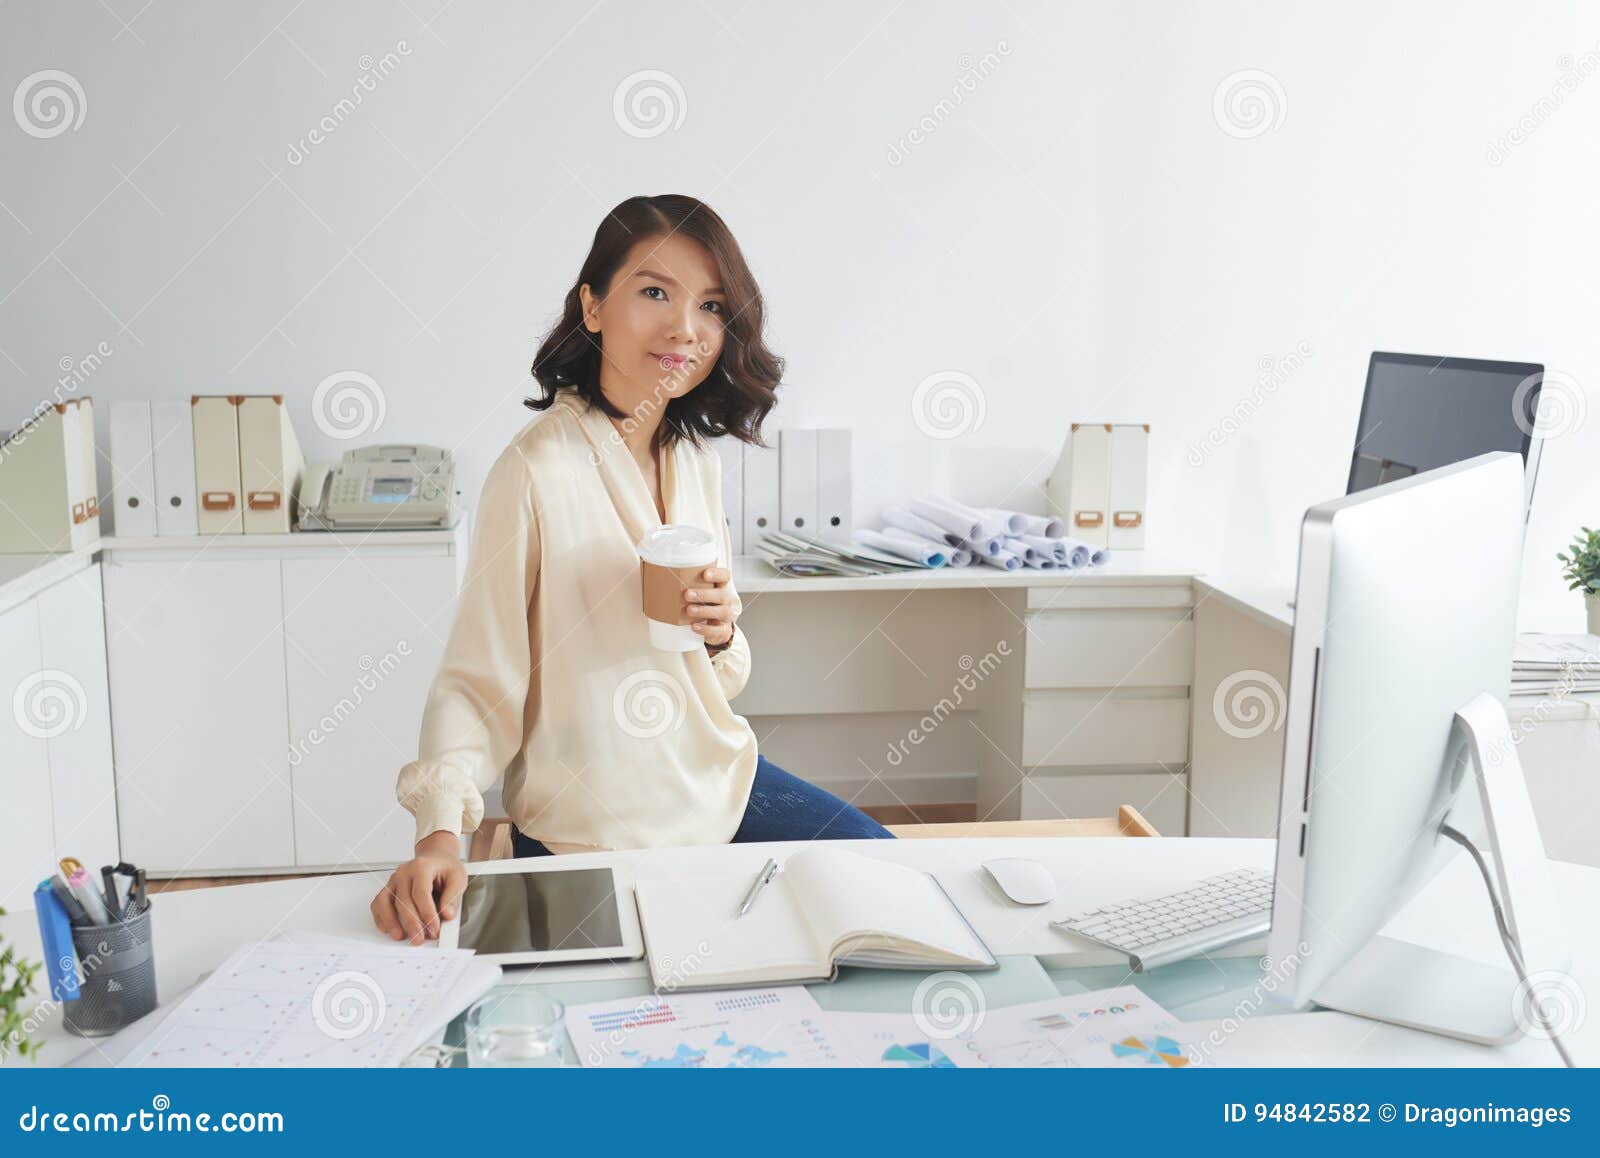 Asian Secretary at Workplace Stock Photo - Image of computer, asian ...